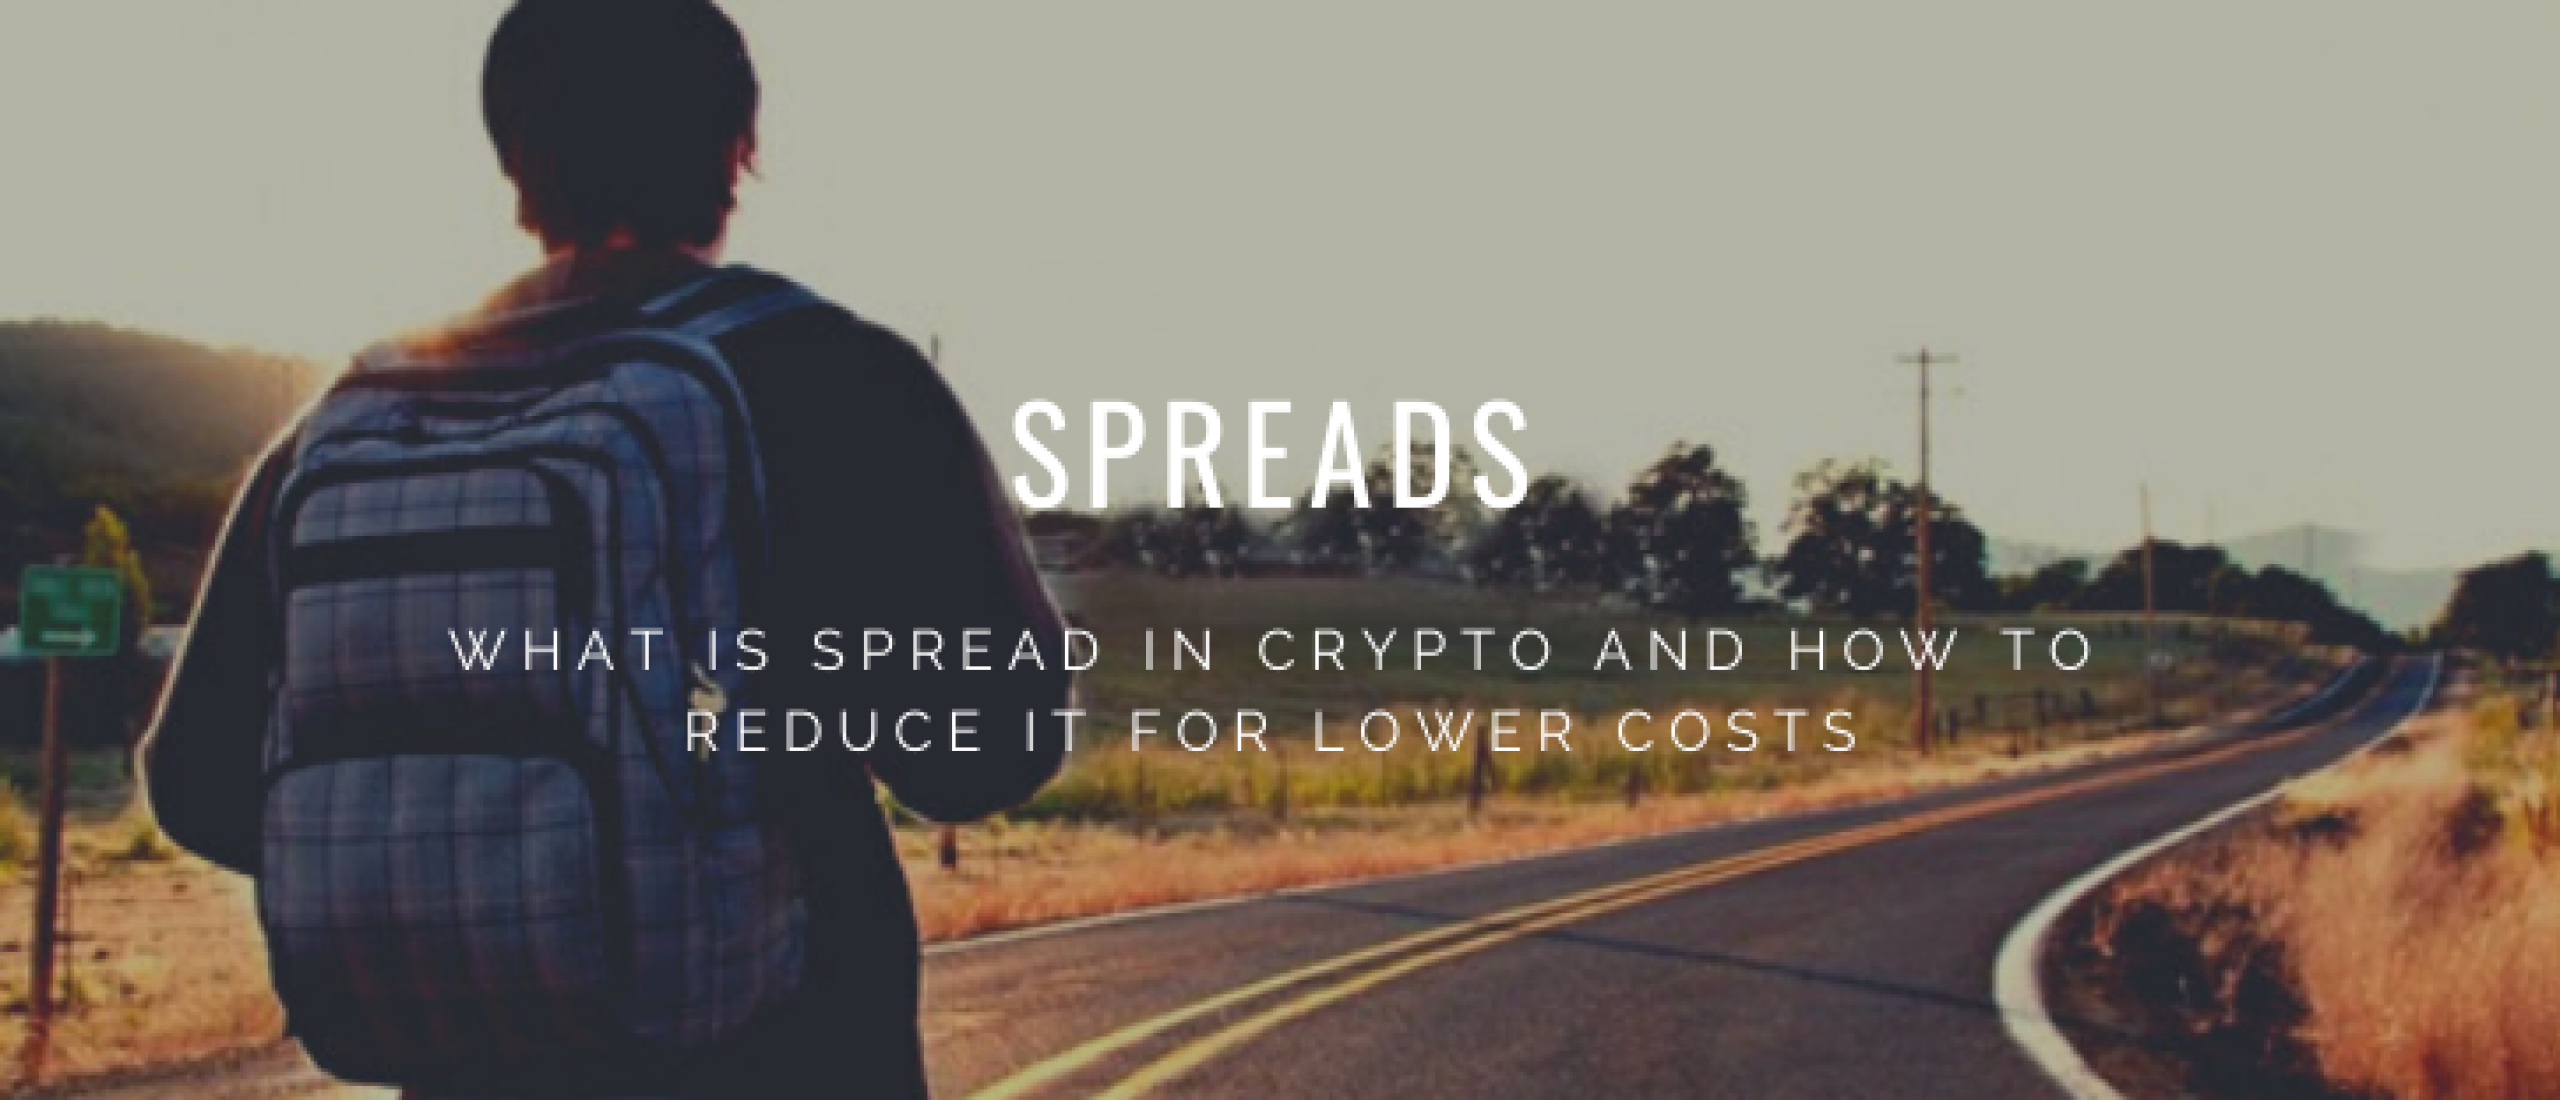 What is Spread in Crypto? Explanation and Tips